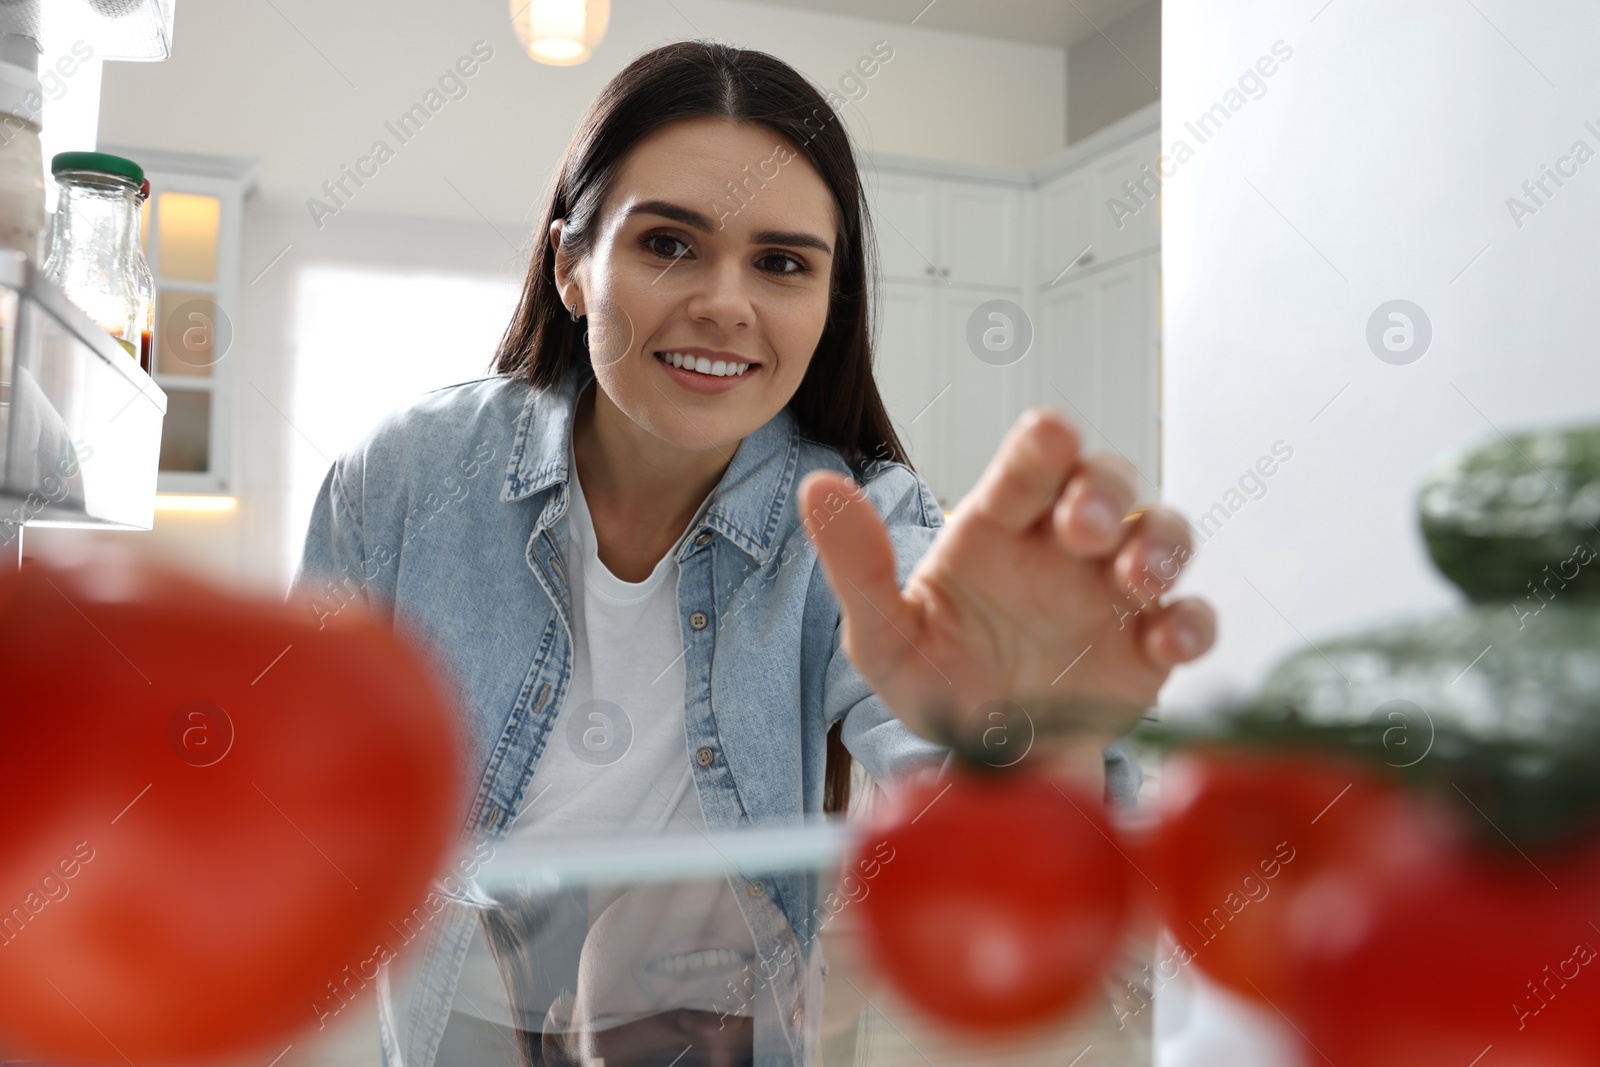 Photo of Young woman near refrigerator in kitchen, view from inside